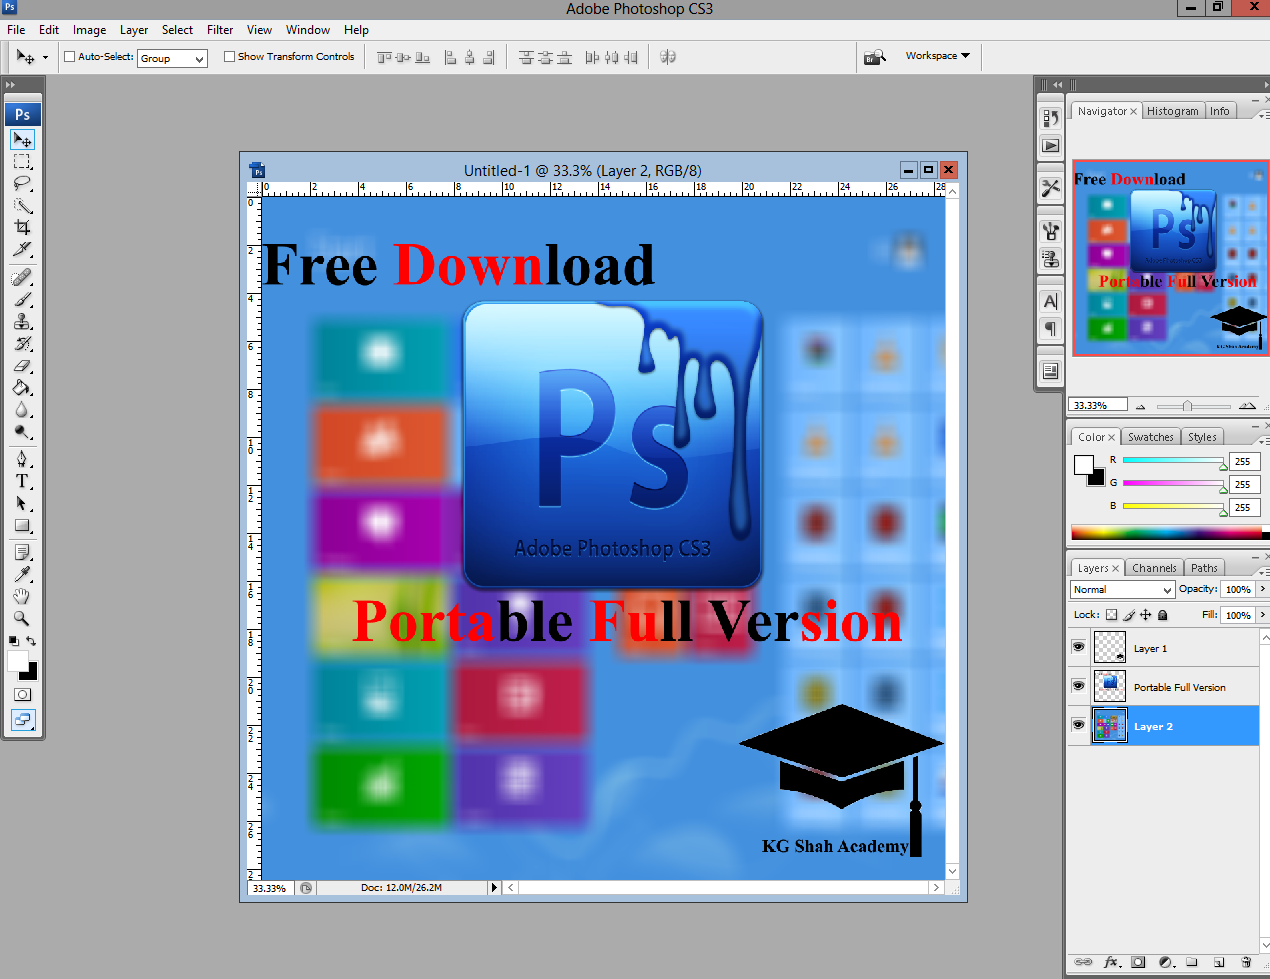 Download Adobe Photoshop Cs3 Full Version Highly Compressed